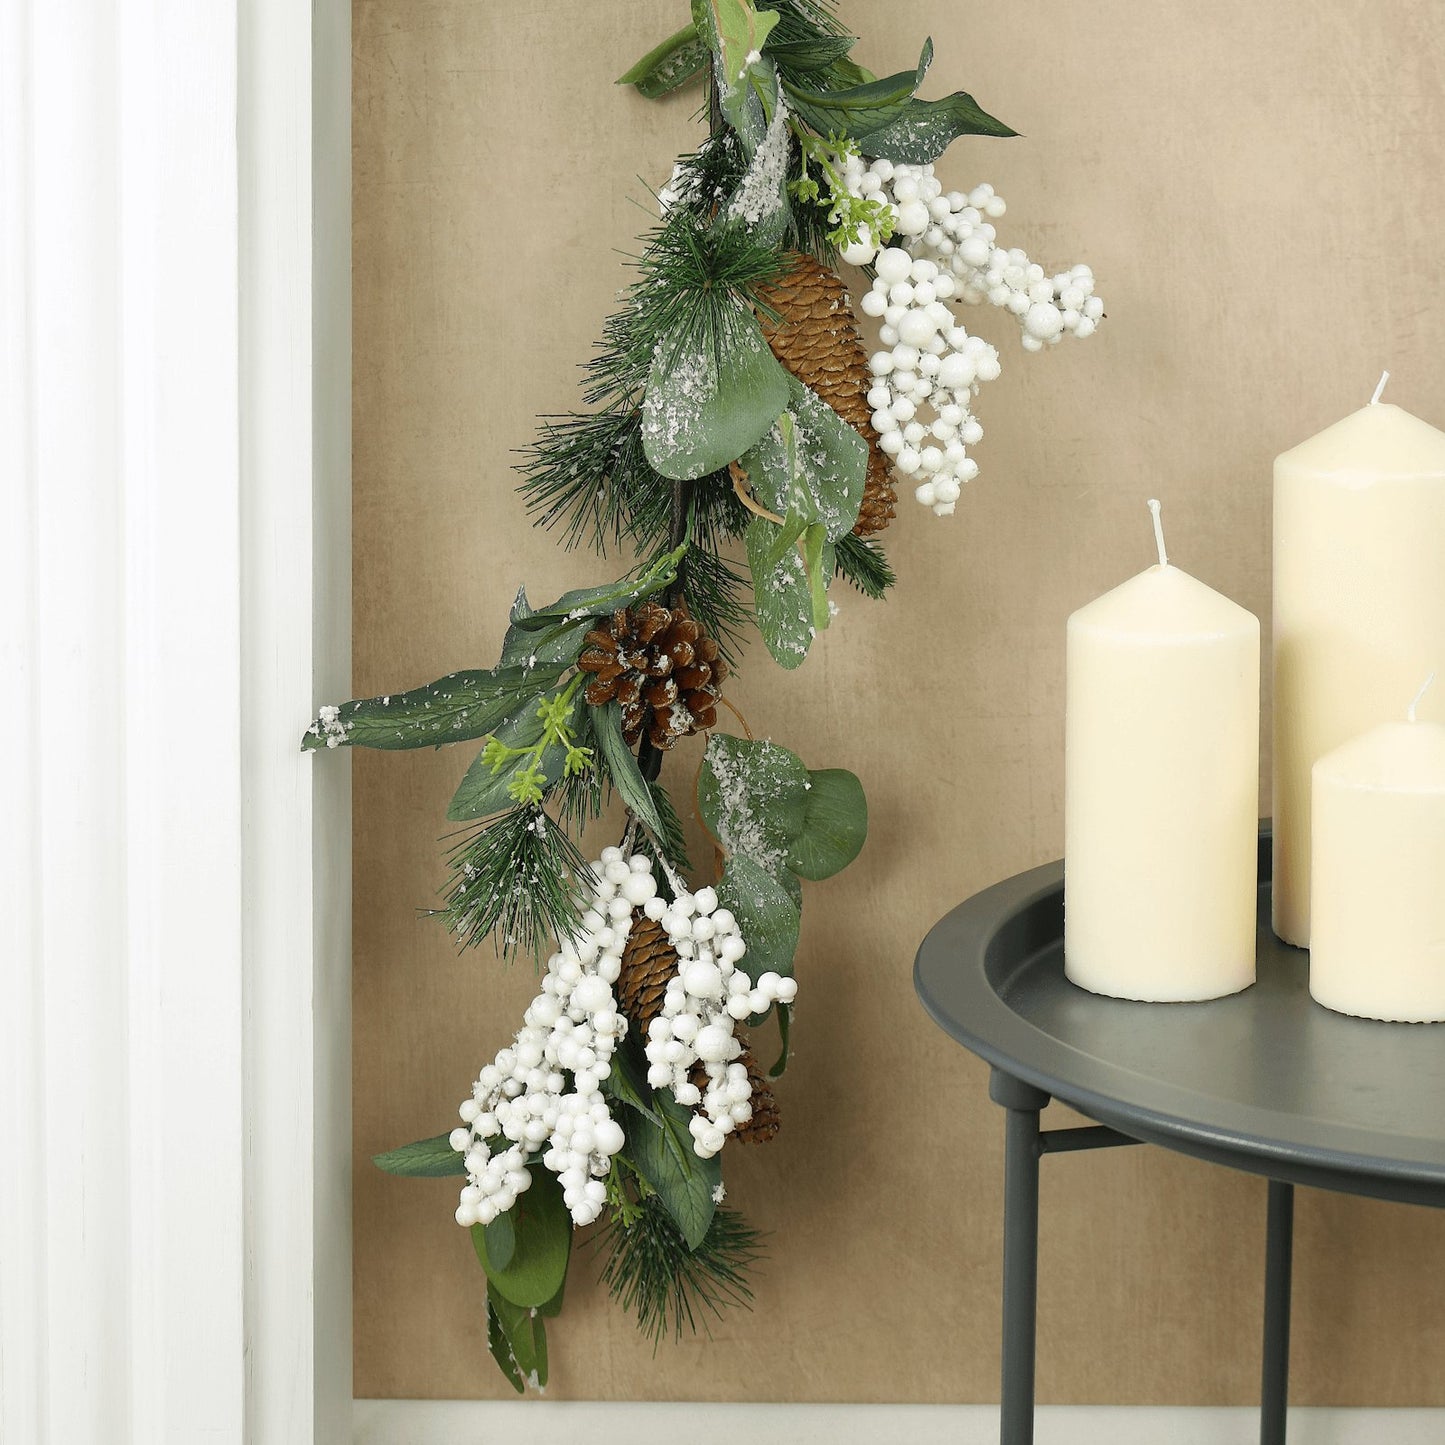 mr crimbo garland hanging down from fireplace mantel styled beside tray table featuring white pillar candles